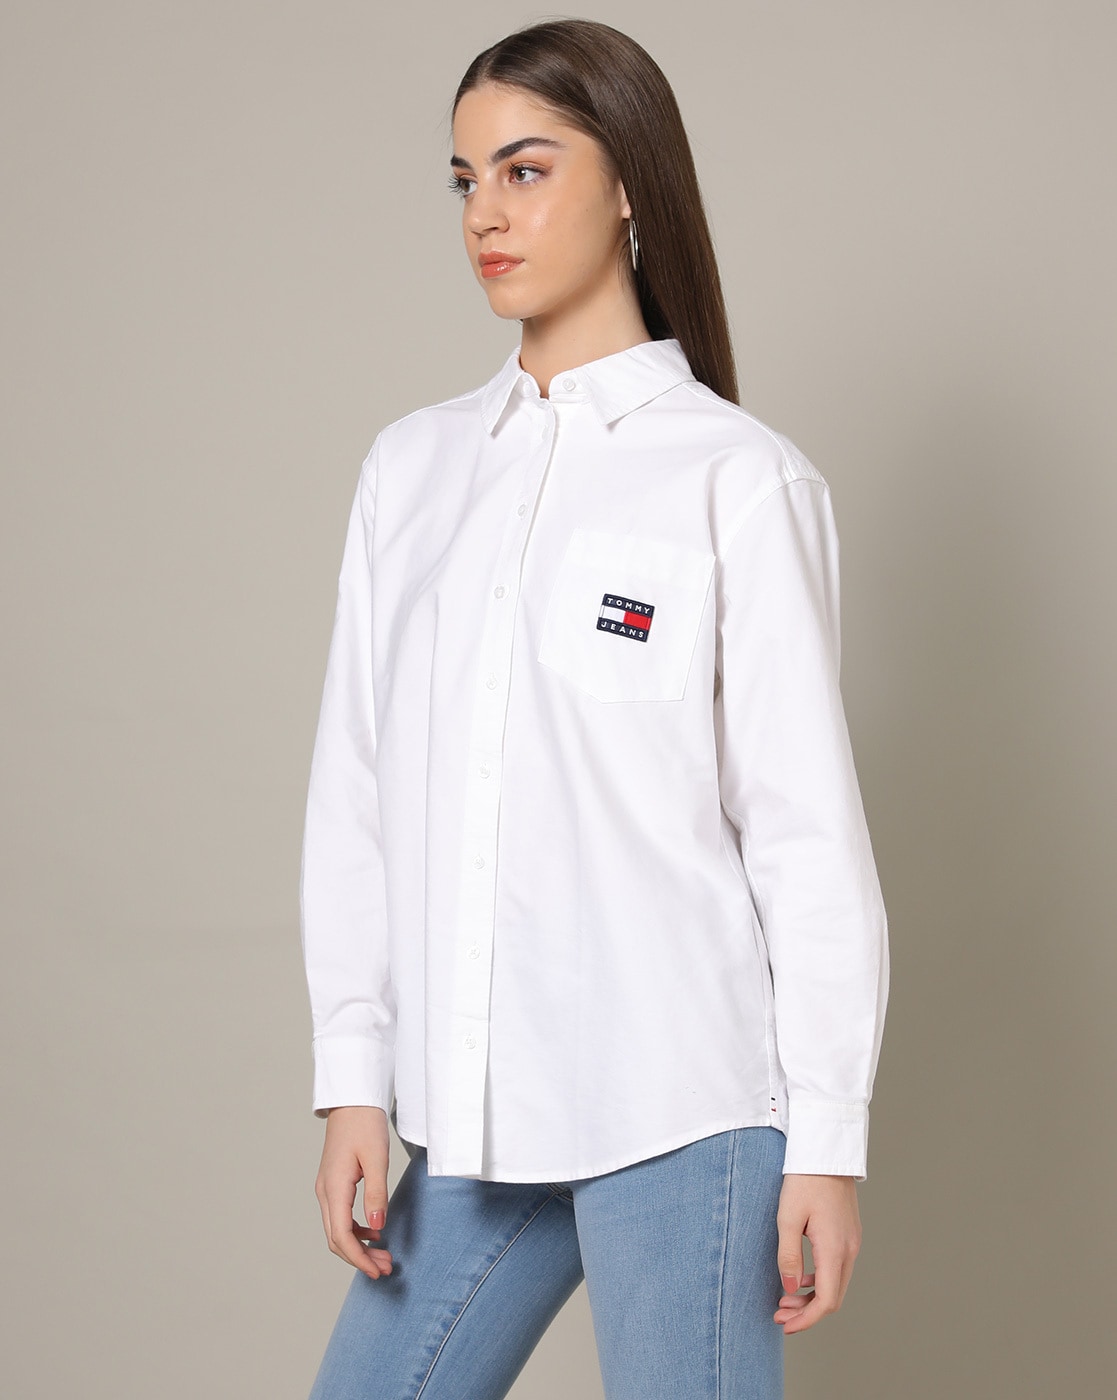 Buy White for Online HILFIGER by TOMMY Shirts Women